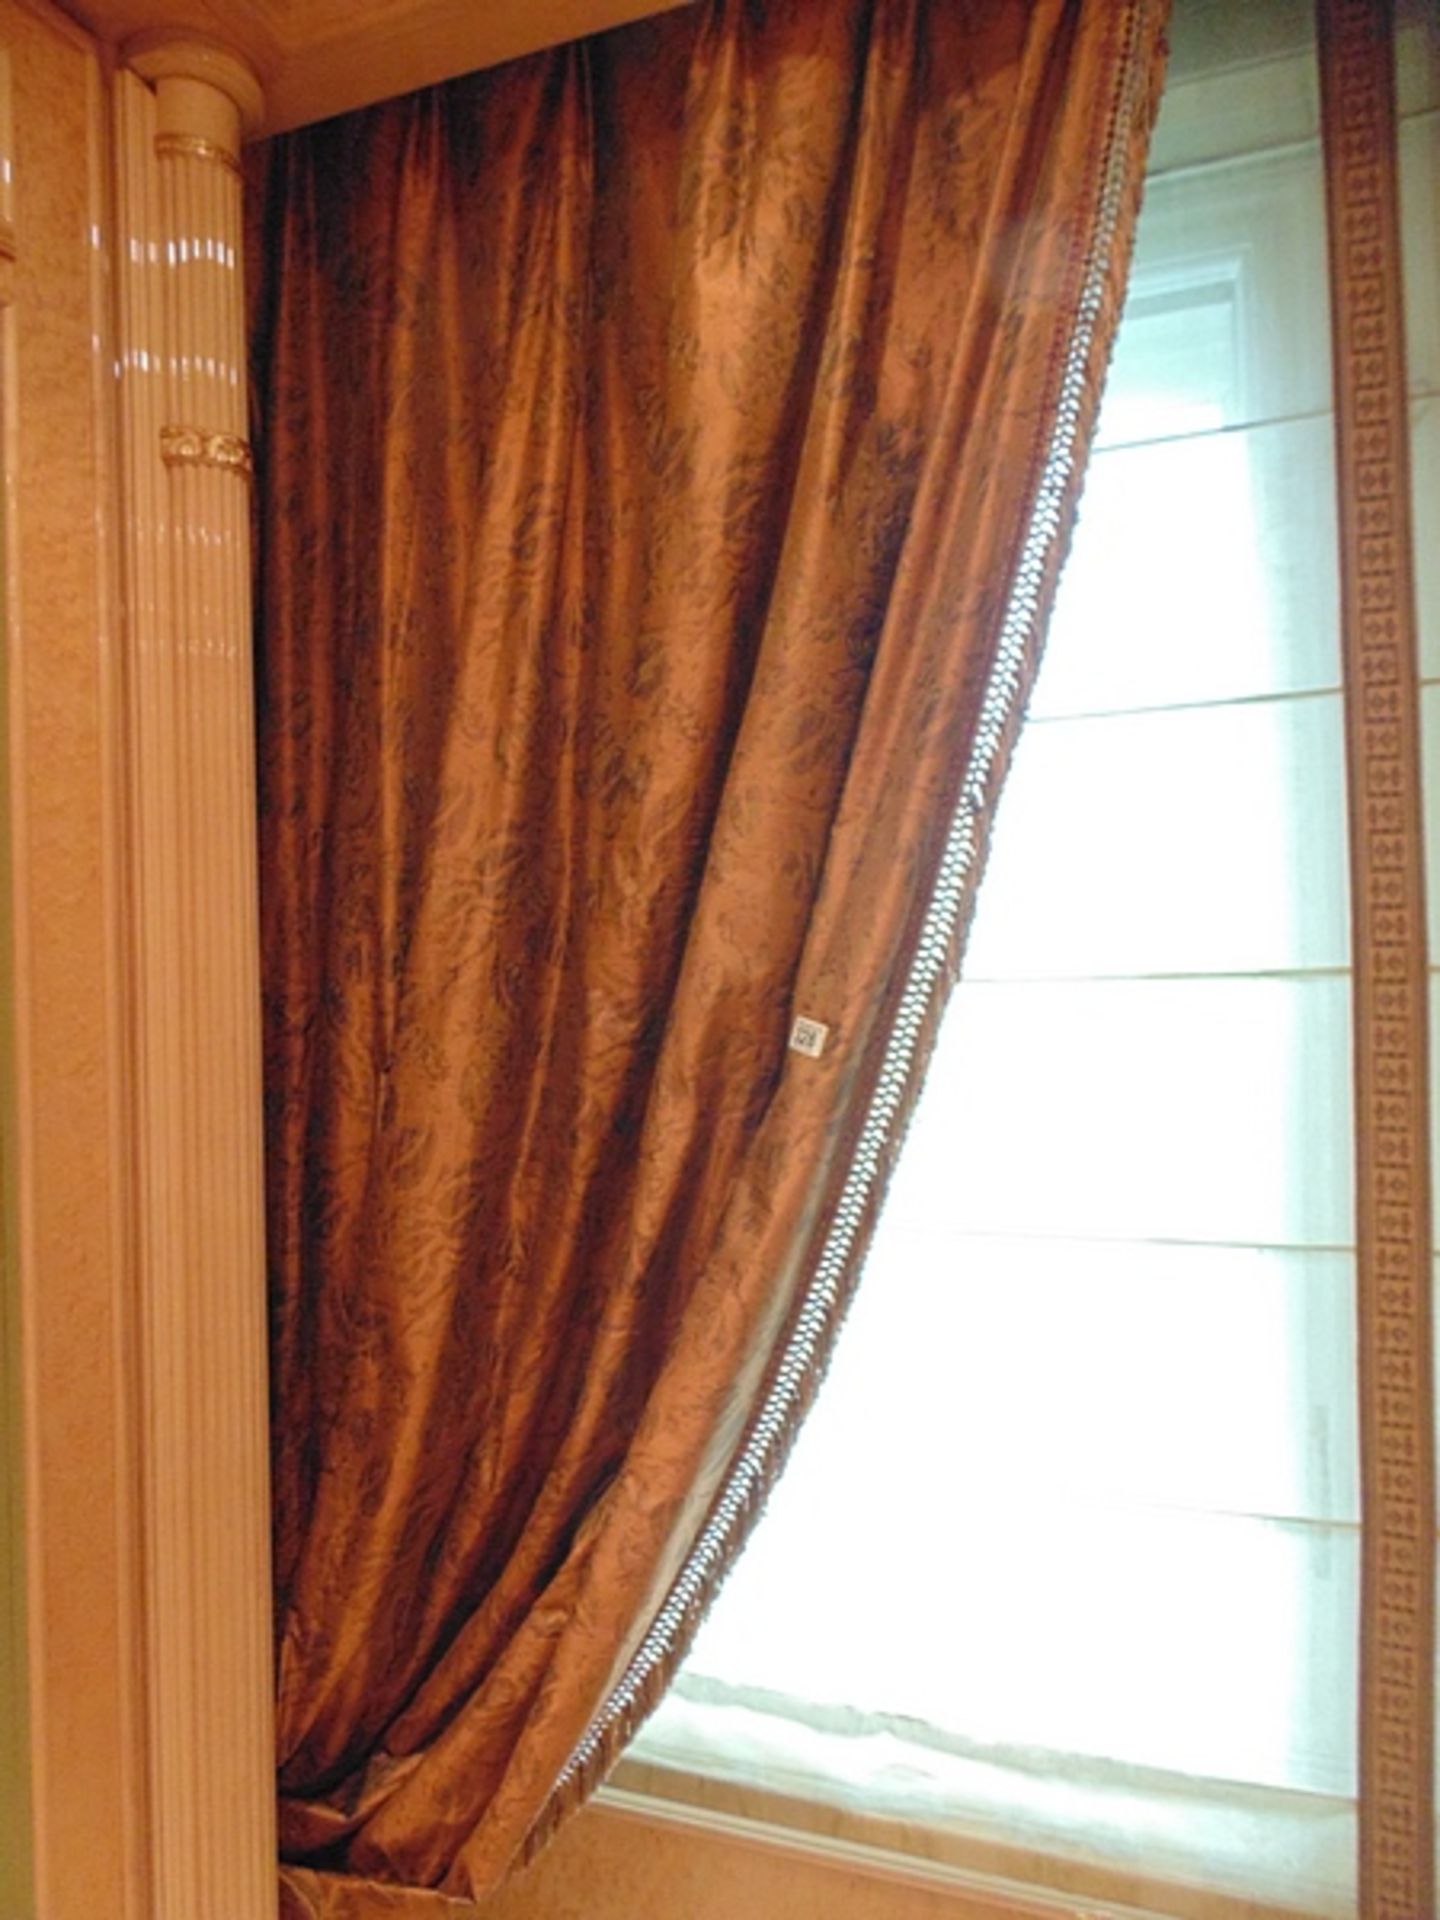 A set of four asymmetrical curtains (makes 2 pairs) of bronze gold curtains supplied by Jacquard